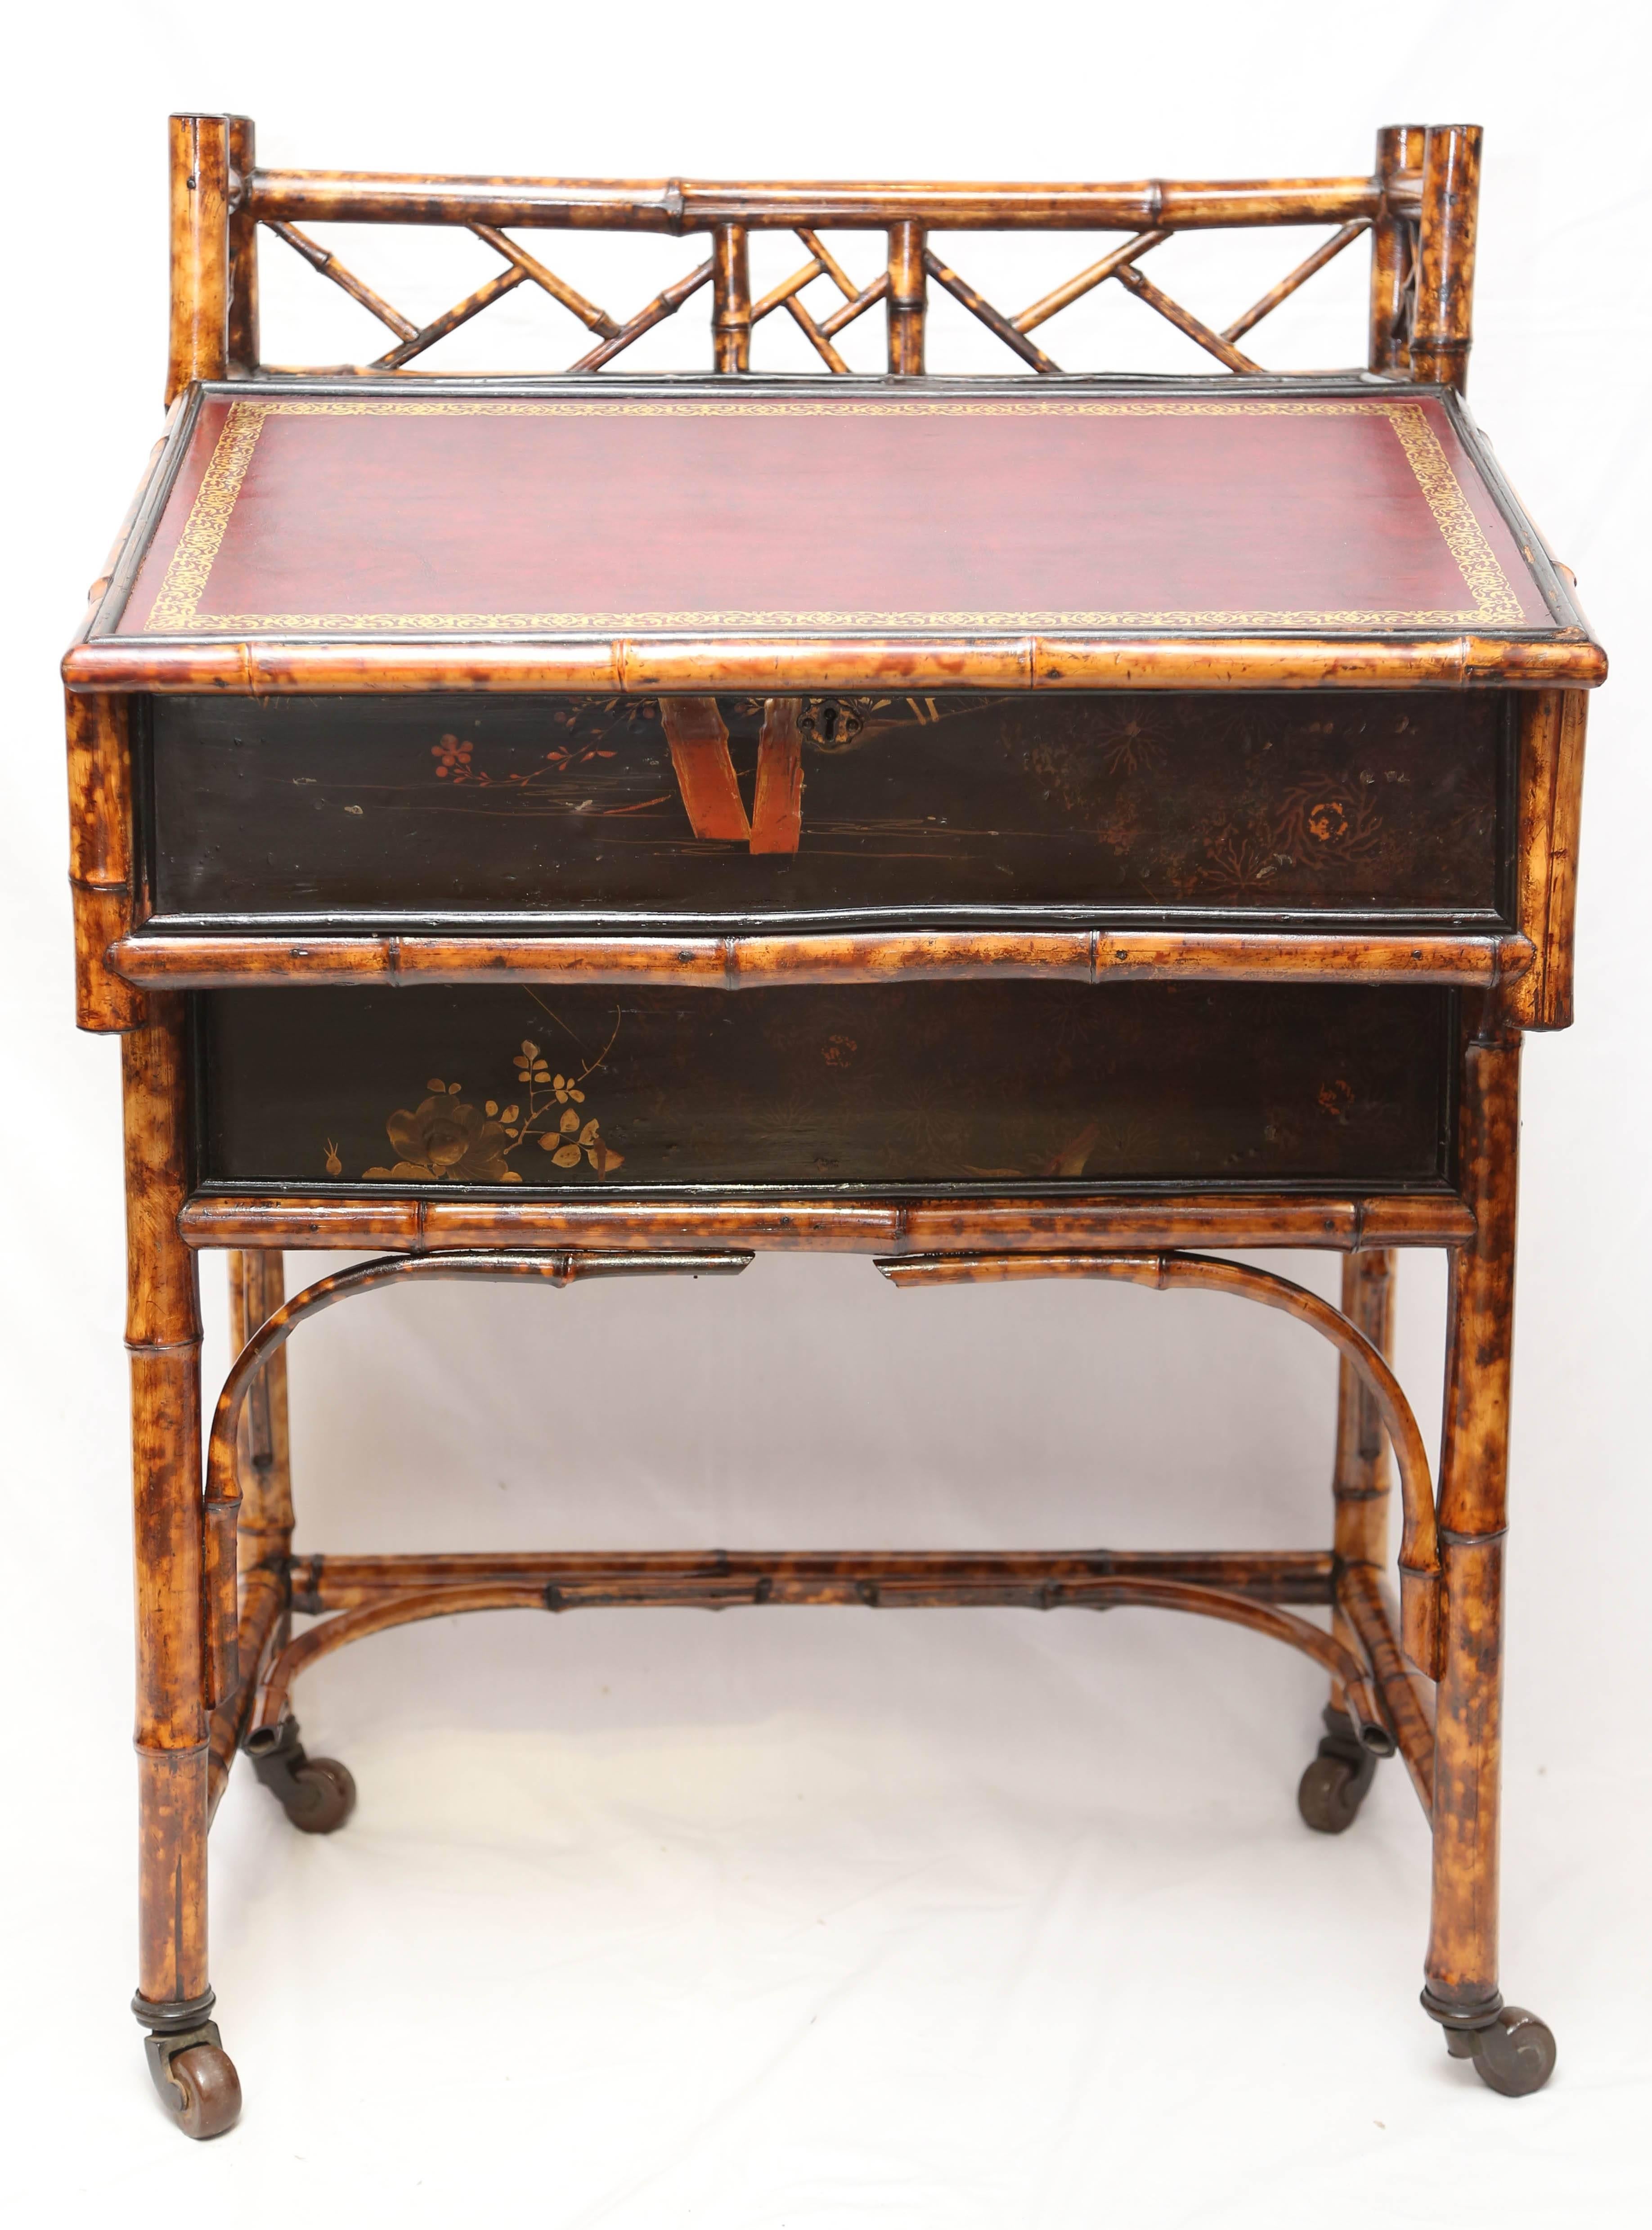 A beautiful 19th century English bamboo desk with a compartment for storage enclosed by a leather clad front lid, two short drawers in case, bamboo legs connected by stretchers, brass casters.
 
 